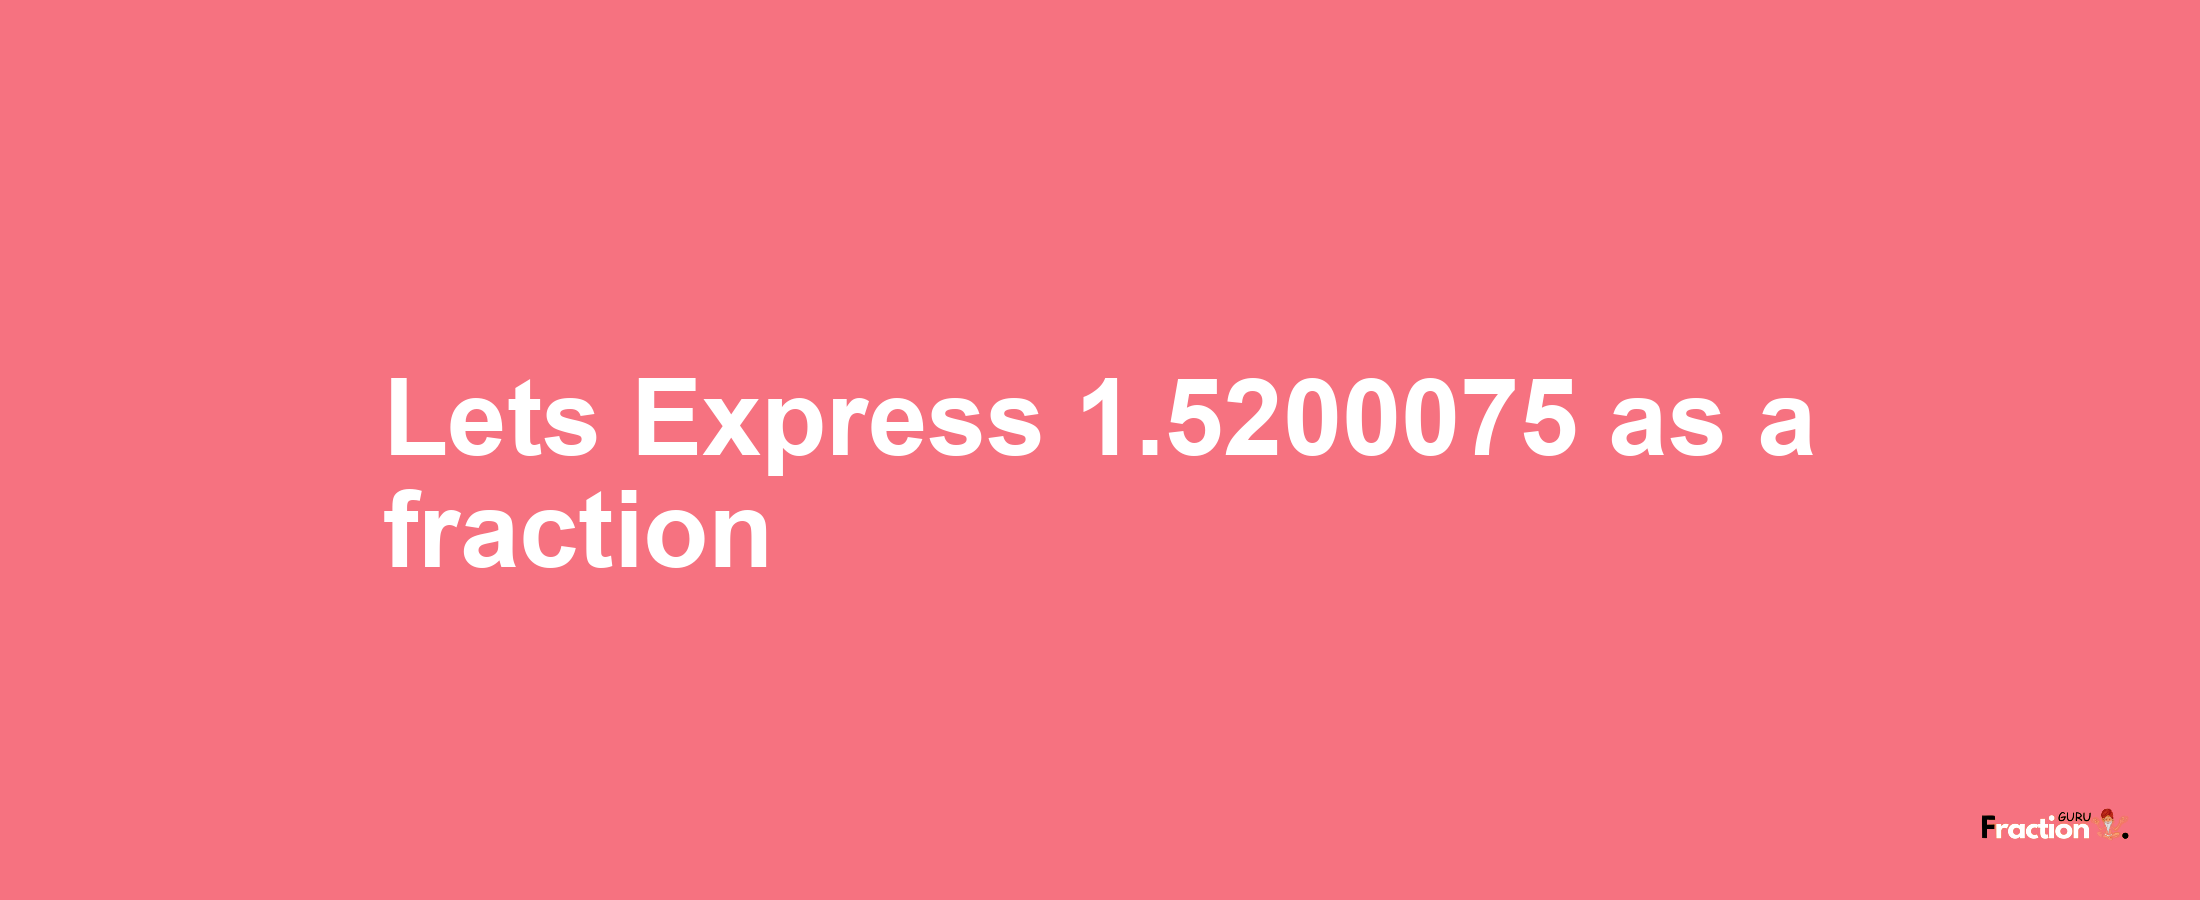 Lets Express 1.5200075 as afraction